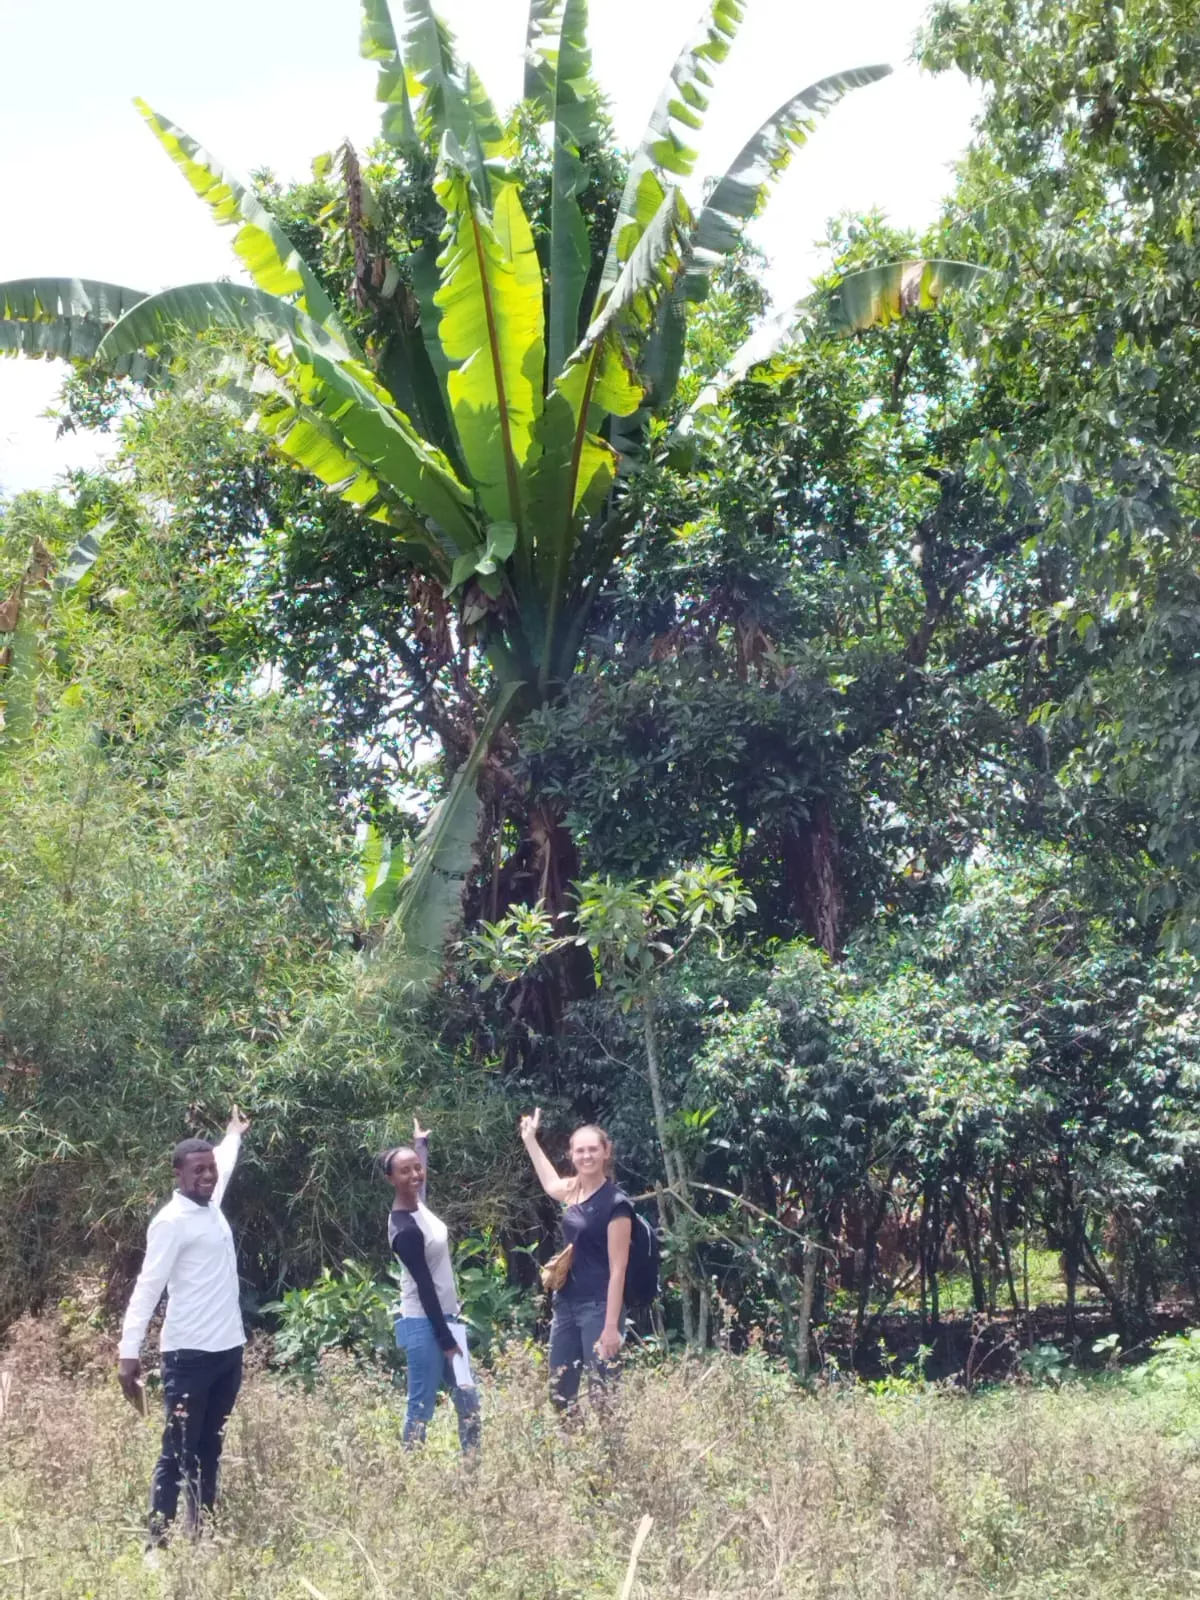 Three researchers are dwarfed by an enormous enset plant, which has huge leaves sprouting from a thick wooded trunk